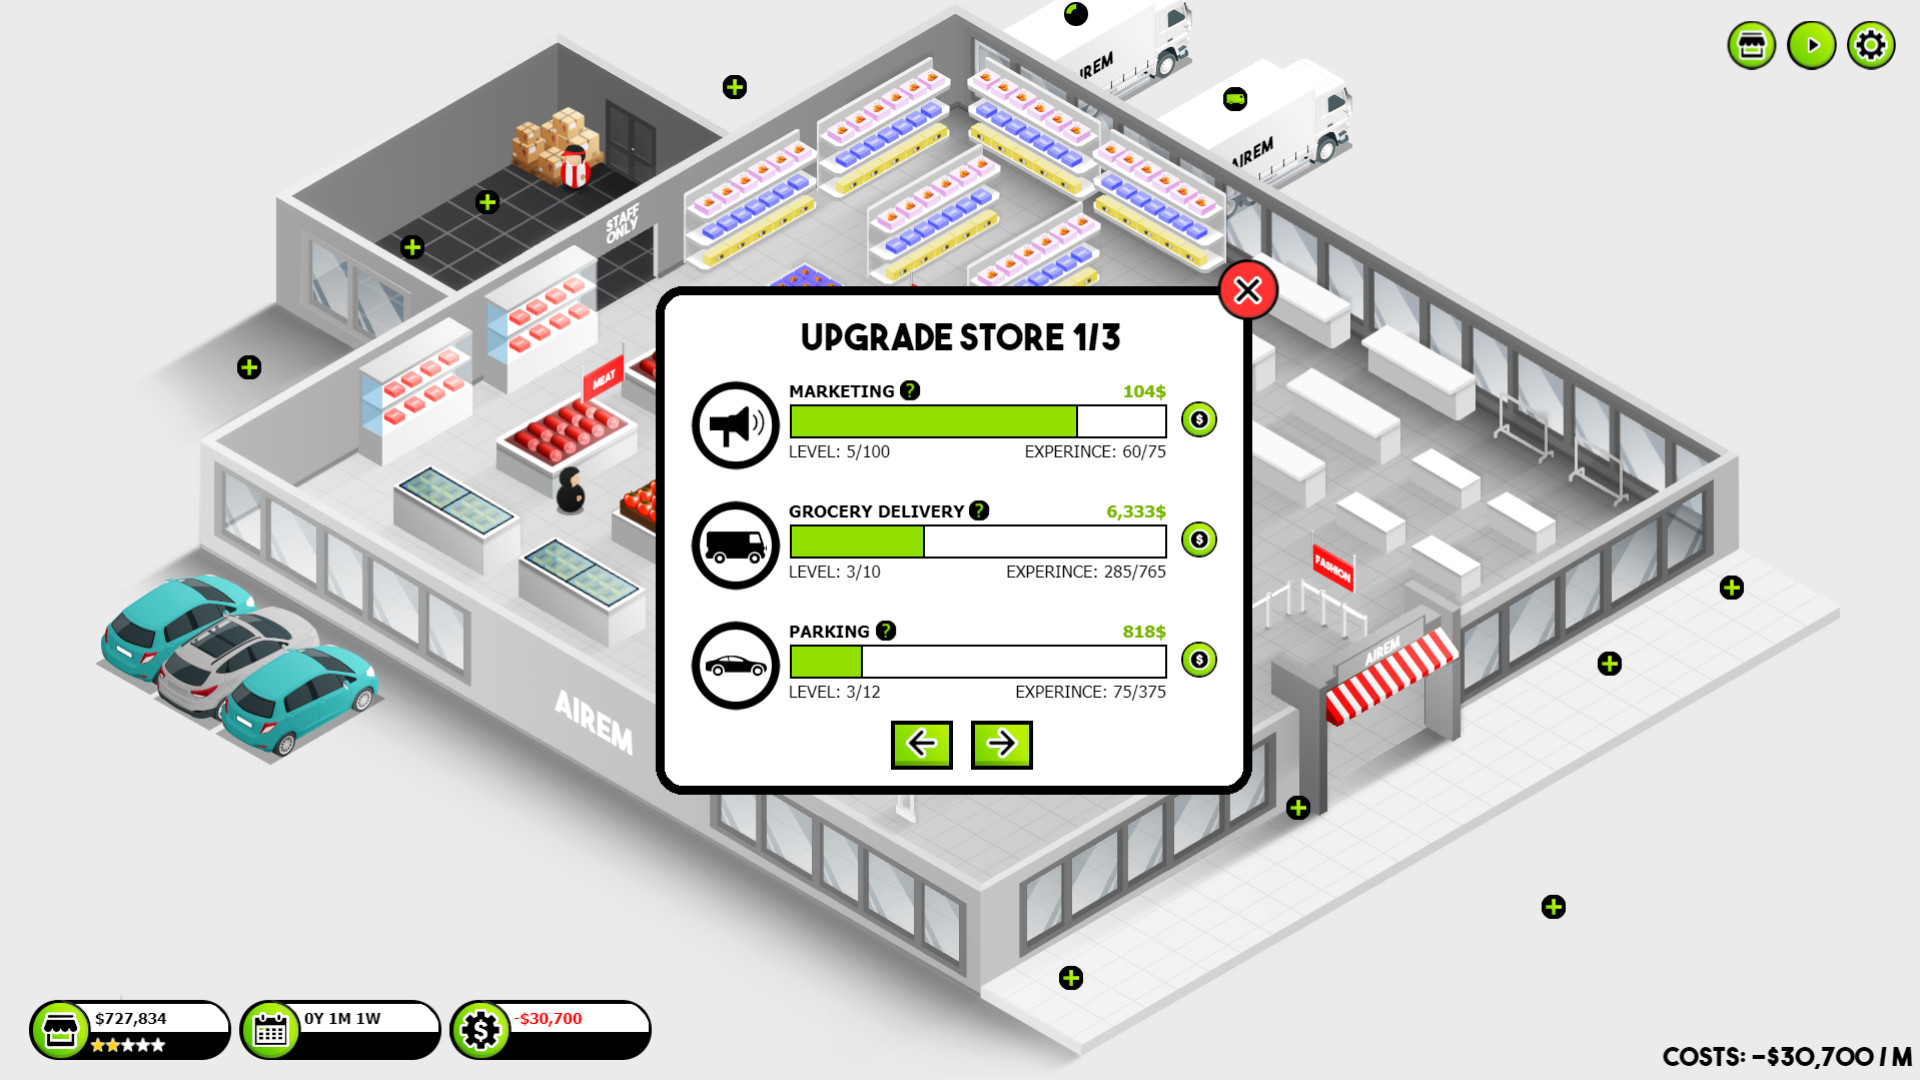 Shop Tycoon: Prepare your wallet on Steam